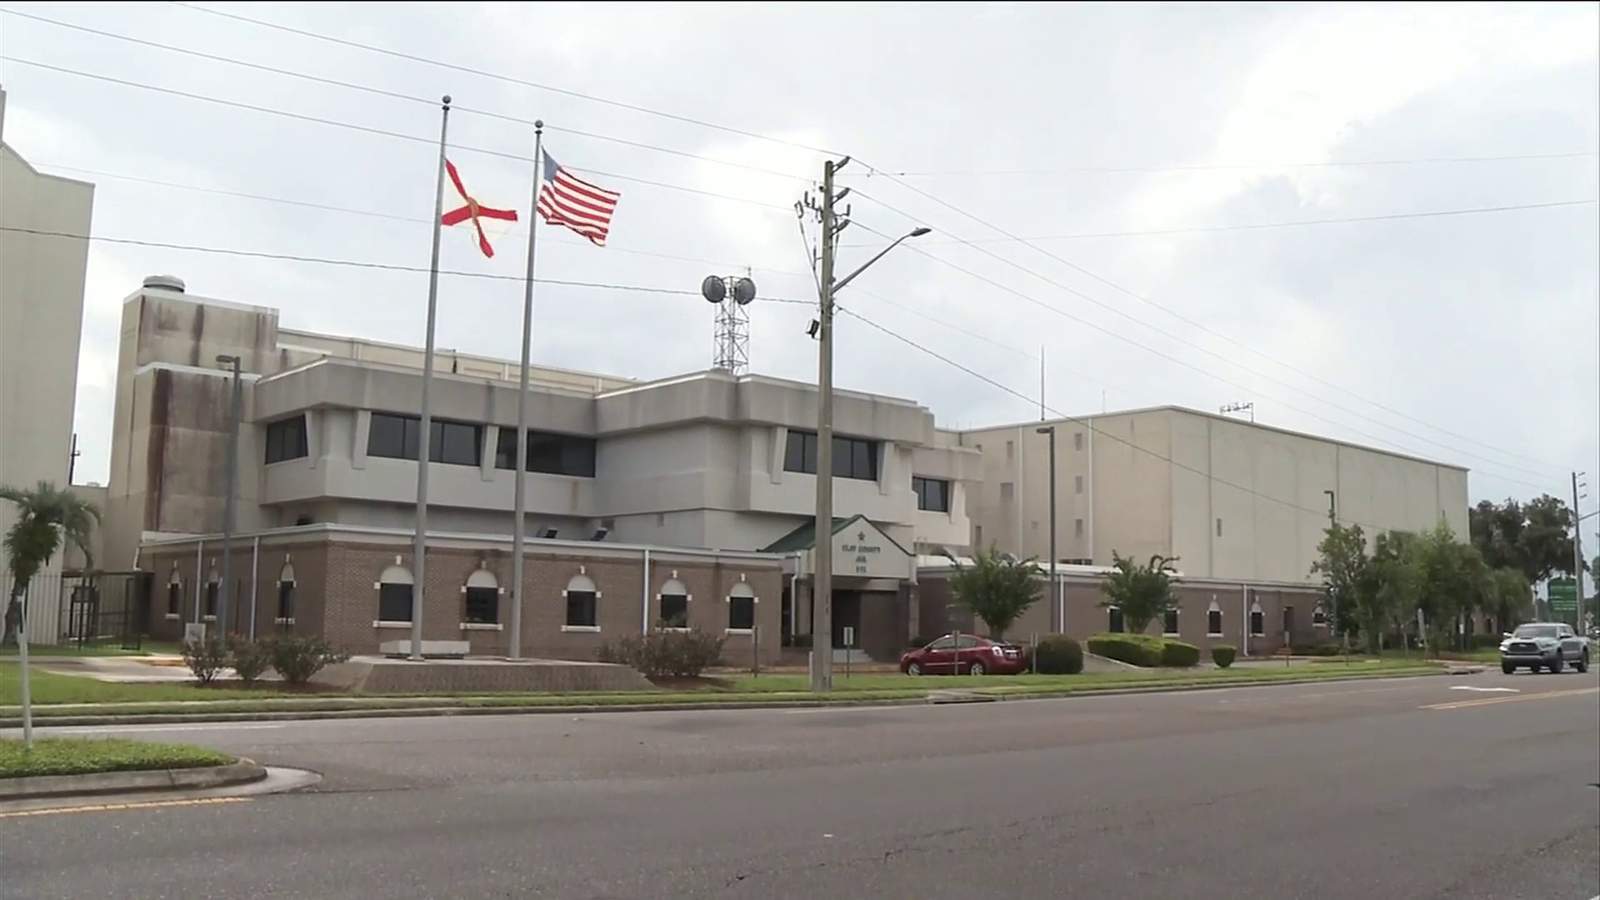 156 Clay County jail inmates test positive for COVID-19